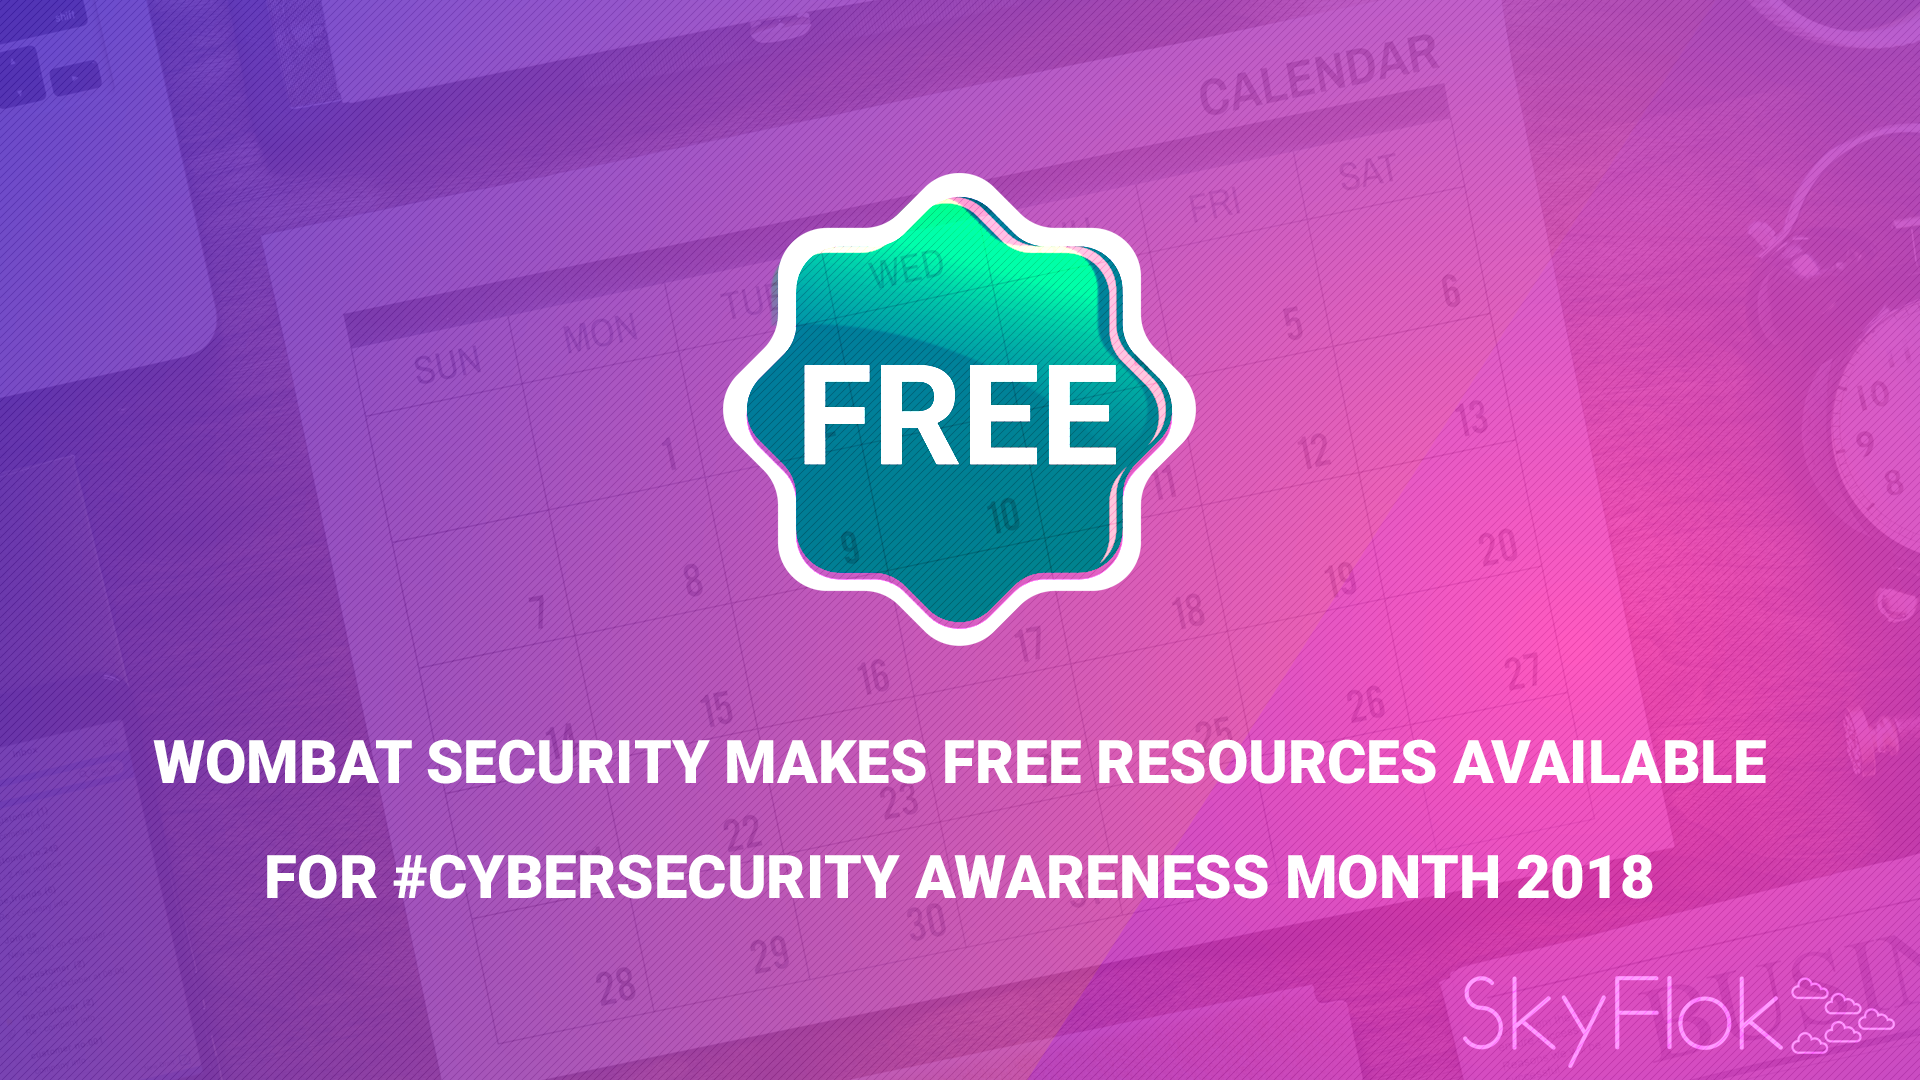 You are currently viewing Wombat Security Makes Free Resources Available for #Cybersecurity Awareness Month 2018